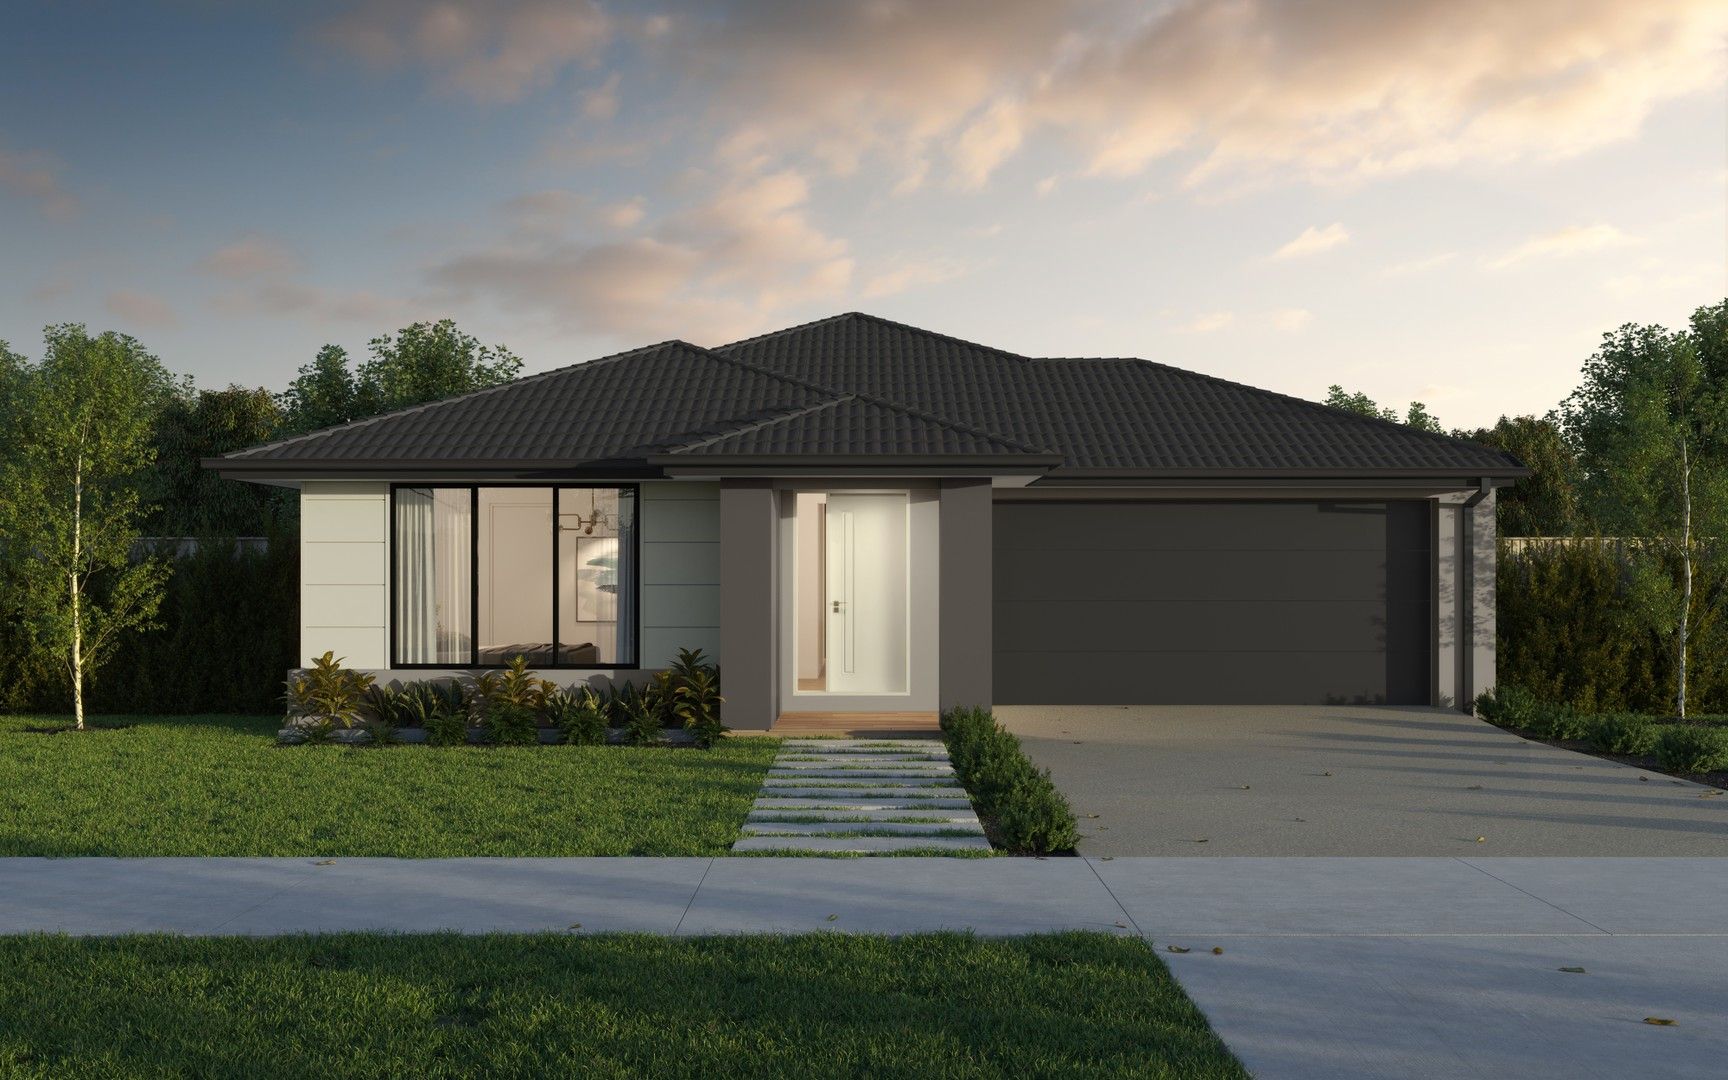 4 bedrooms New House & Land in 34 Manna Drive NEWBOROUGH VIC, 3825